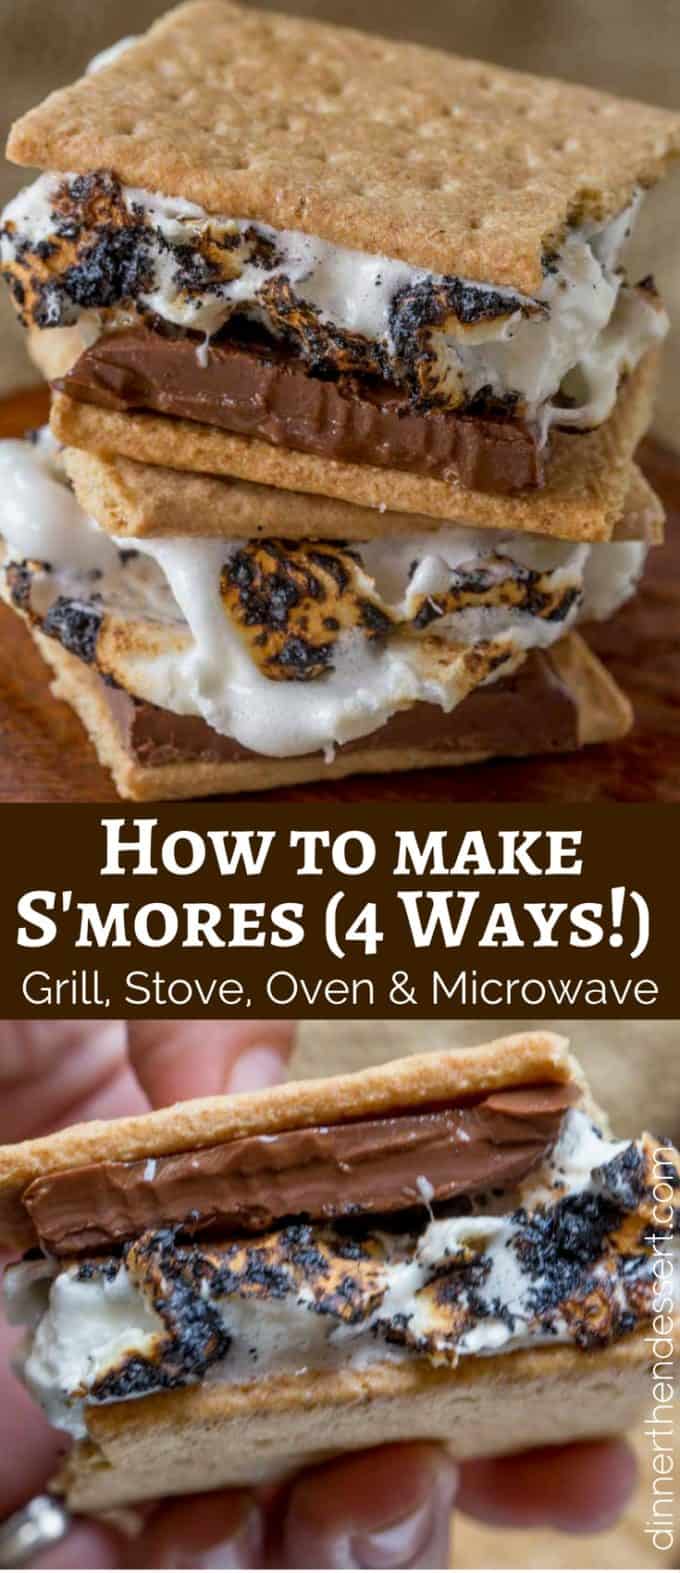 How To Make S Mores 4 Ways Dinner Then Dessert,How To Make Beaded Bracelets With Cord